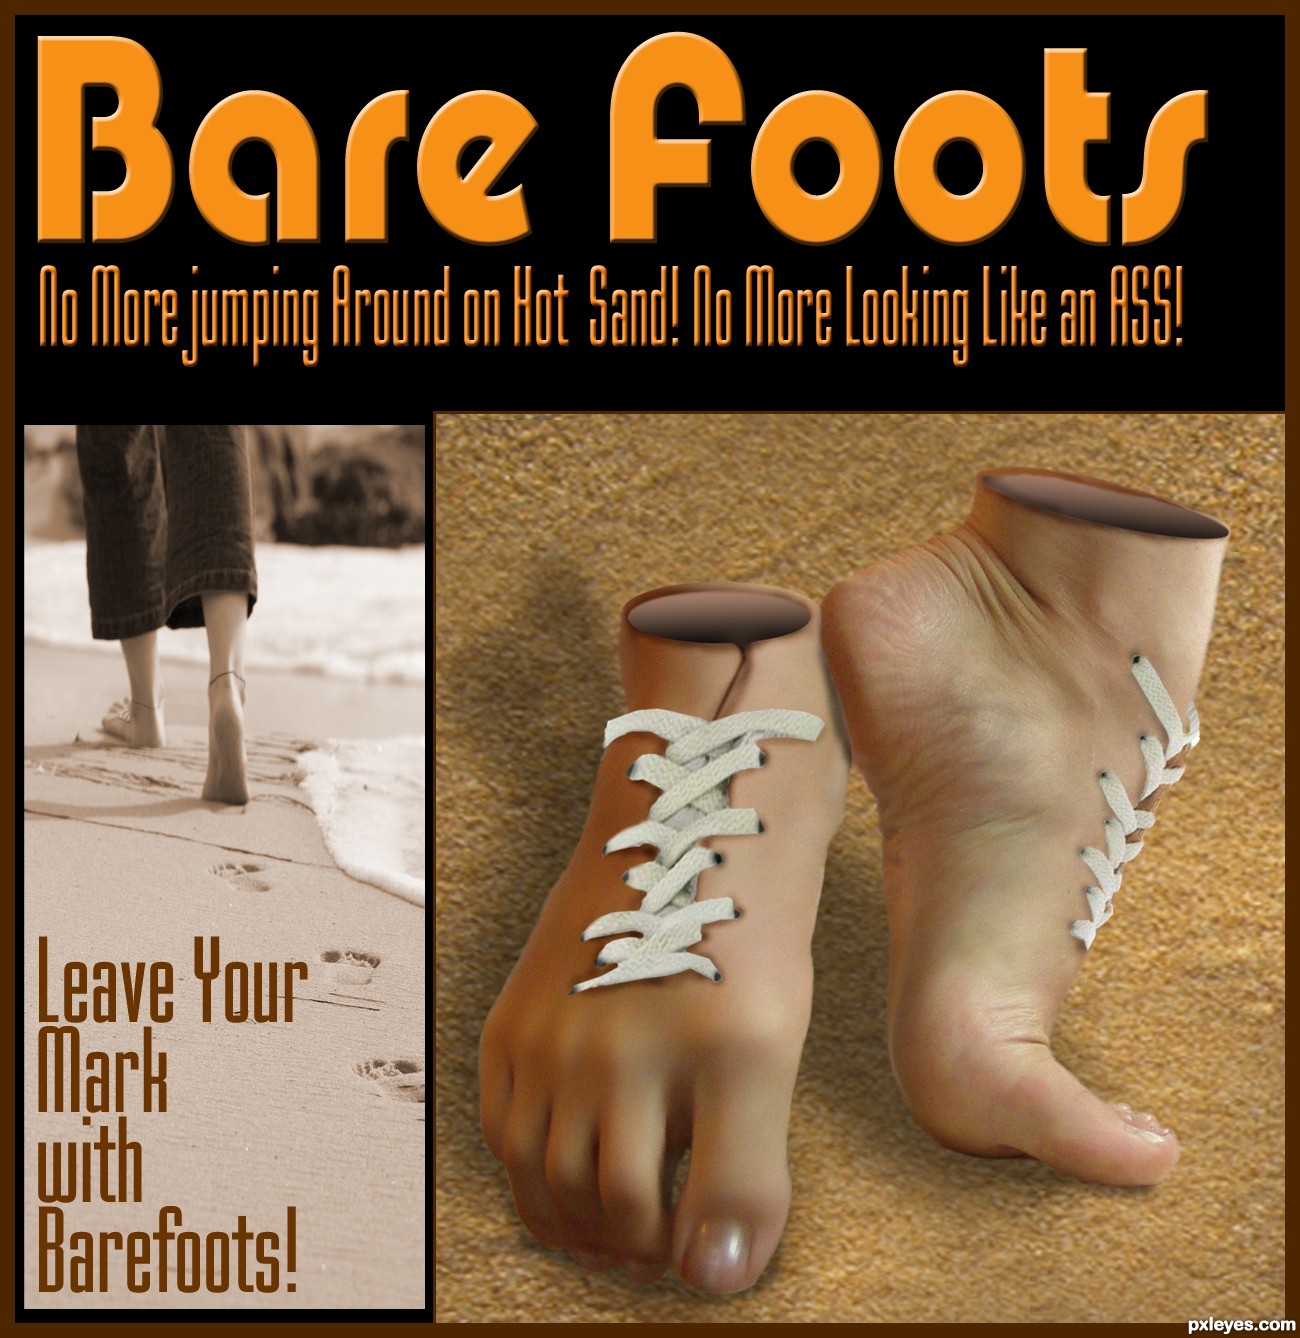 Go Bare Foot  Its Cooler picture, by Geexman for: unconventional shoes  photoshop contest 